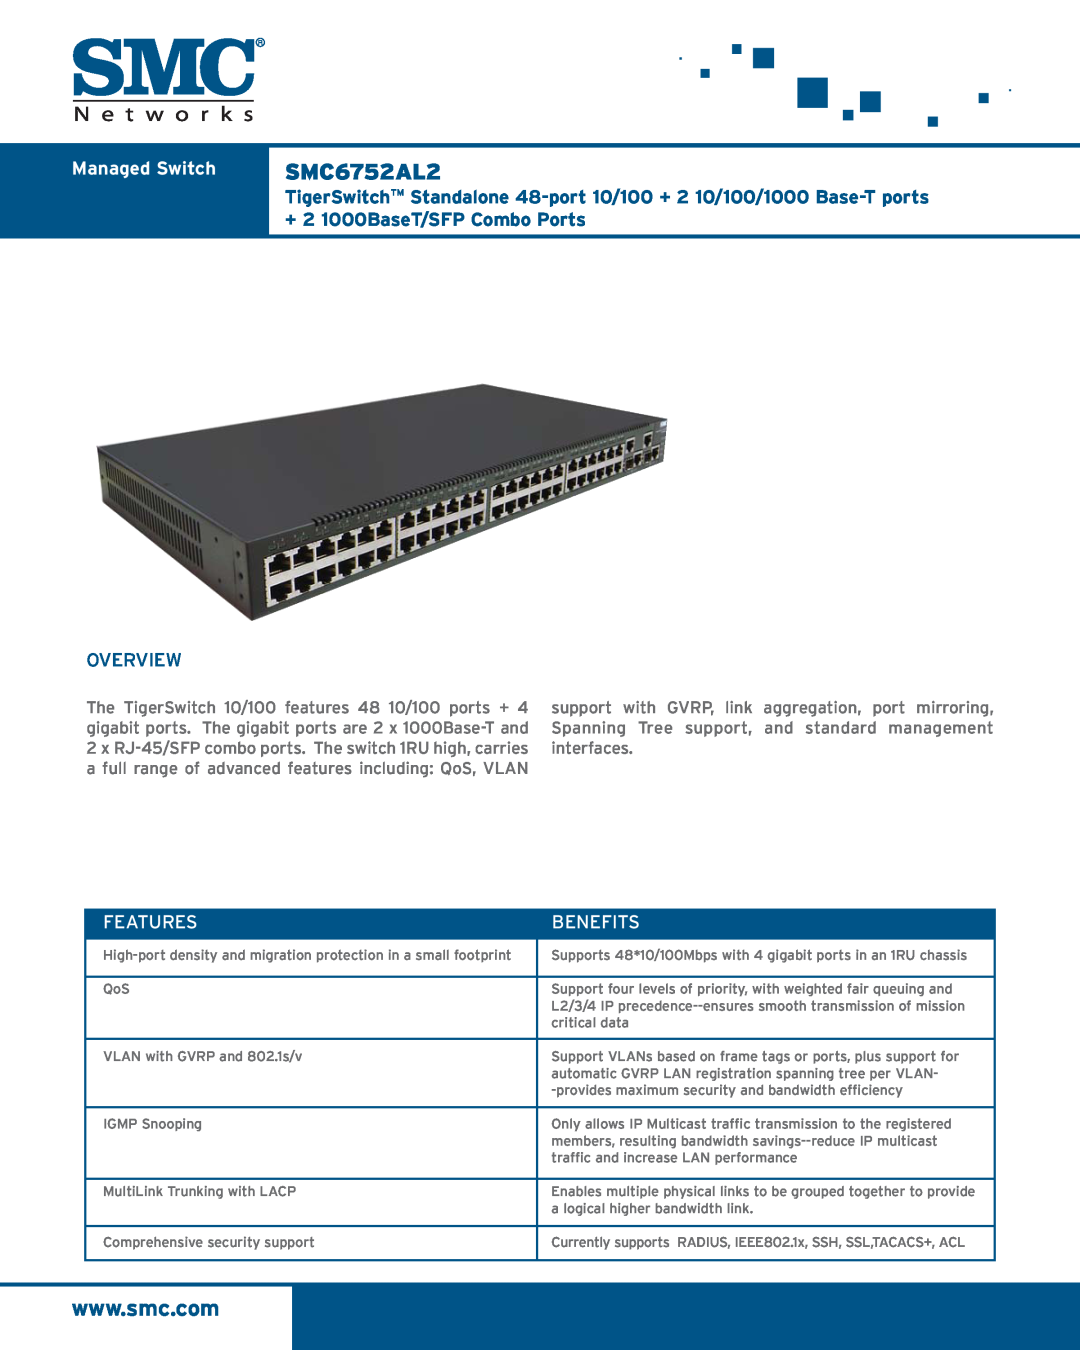 SMC Networks SMC6752AL2 manual Managed Switch, TigerSwitchTM Standalone 48-port 10/100 + 2 10/100/1000 Base-T ports 